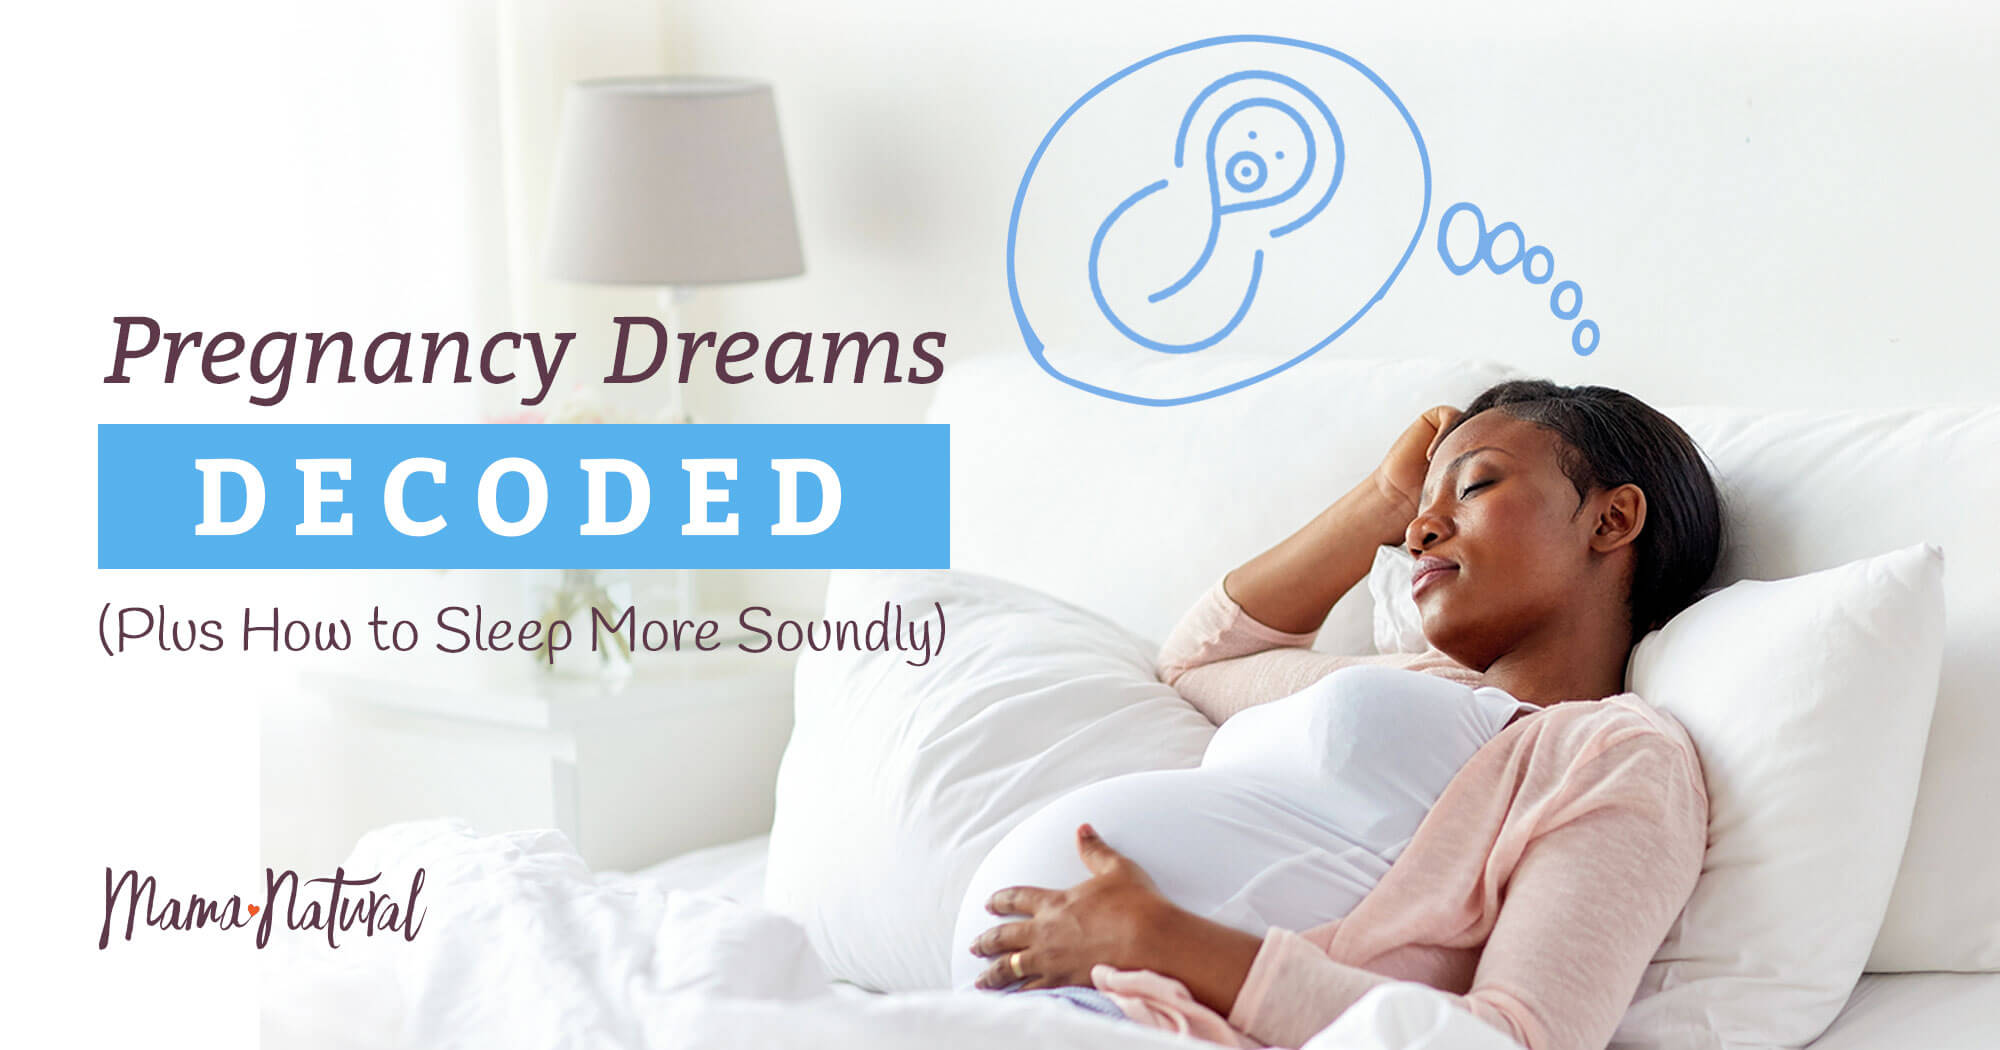 dreams about pregnancy download free